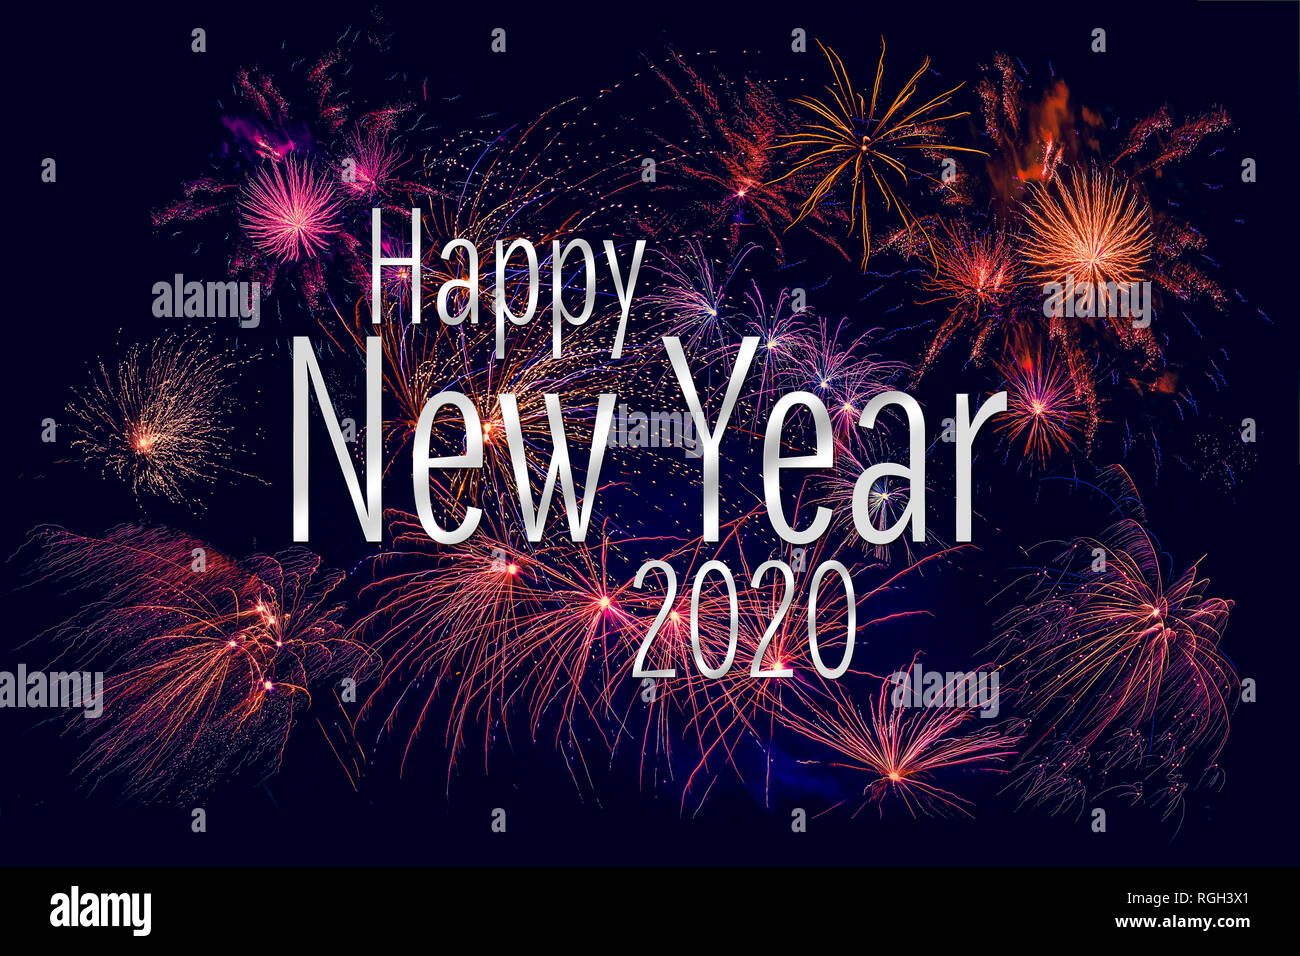 Happy New Year 2020 greeting with colorful fireworks in the night sky Stock Photo